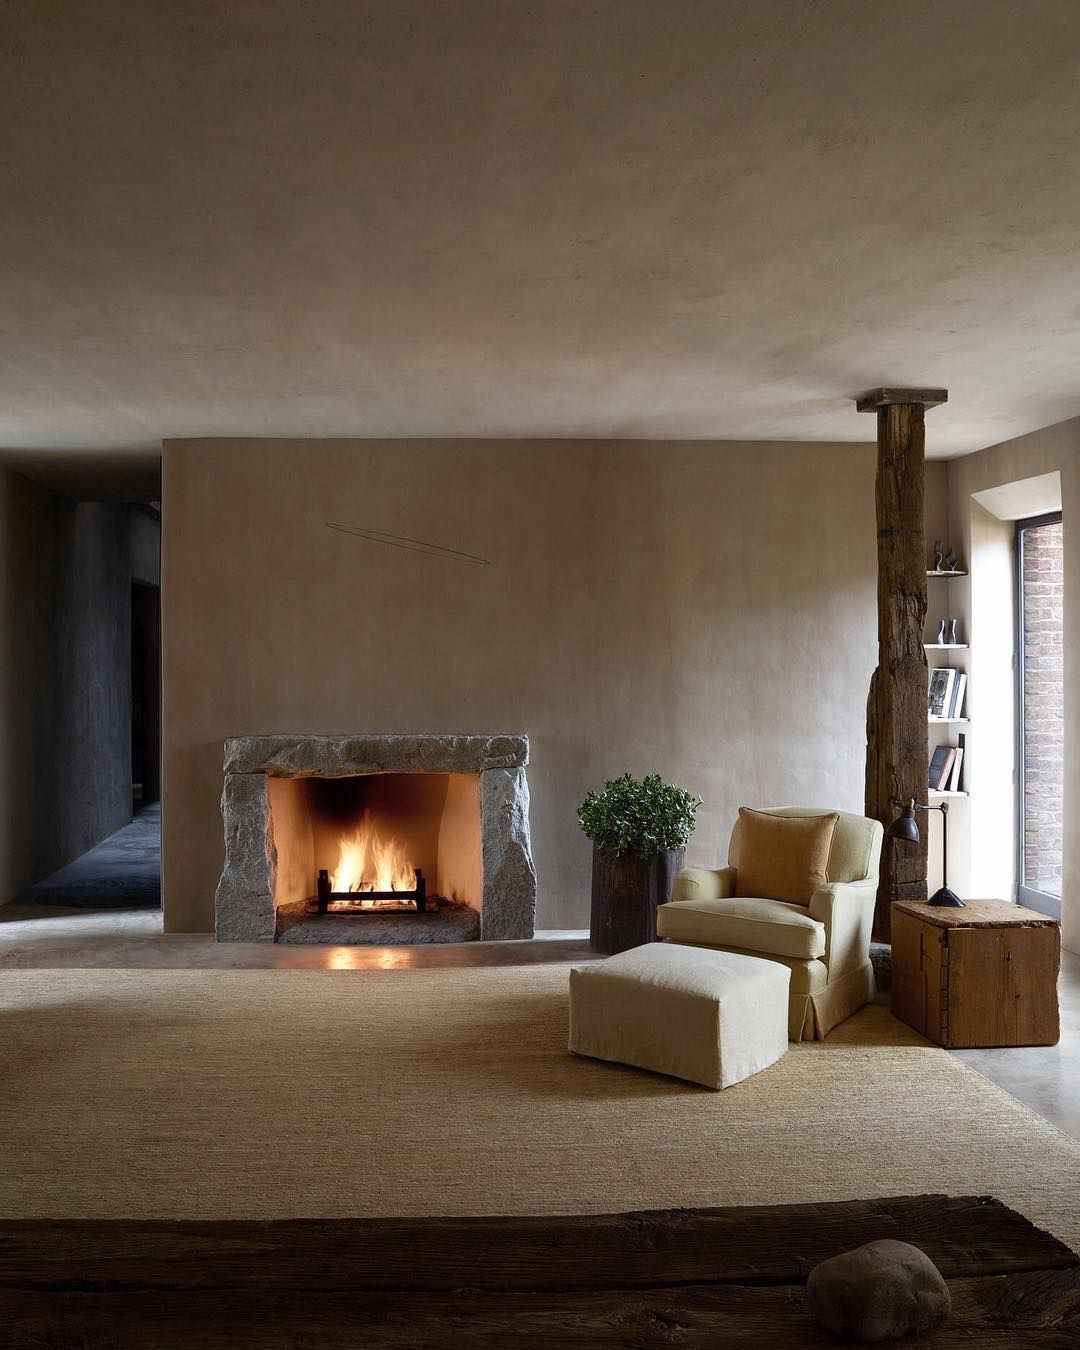 Bluestone Fireplace Beautiful Greenwich Hotel In New York New York by Axel Vervoordt and